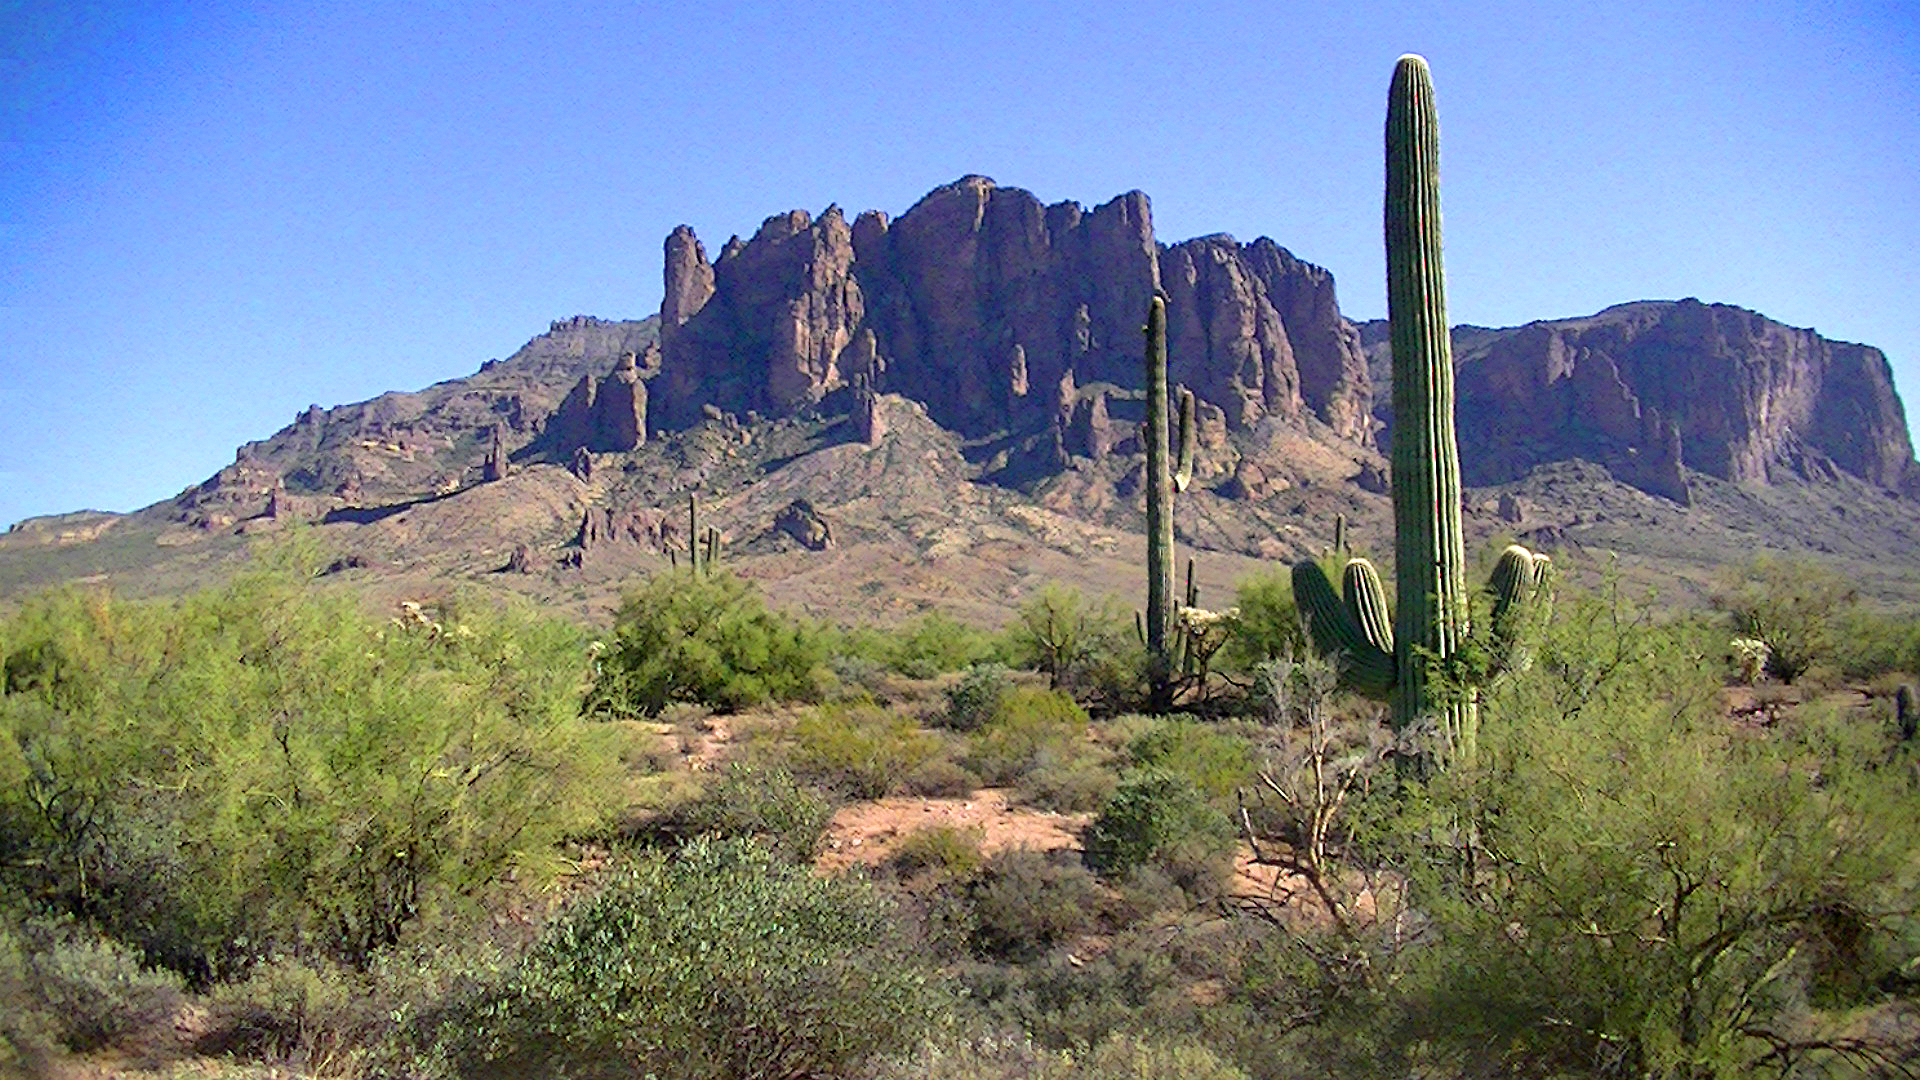 a large sagua mountain next to a cactus filled with water